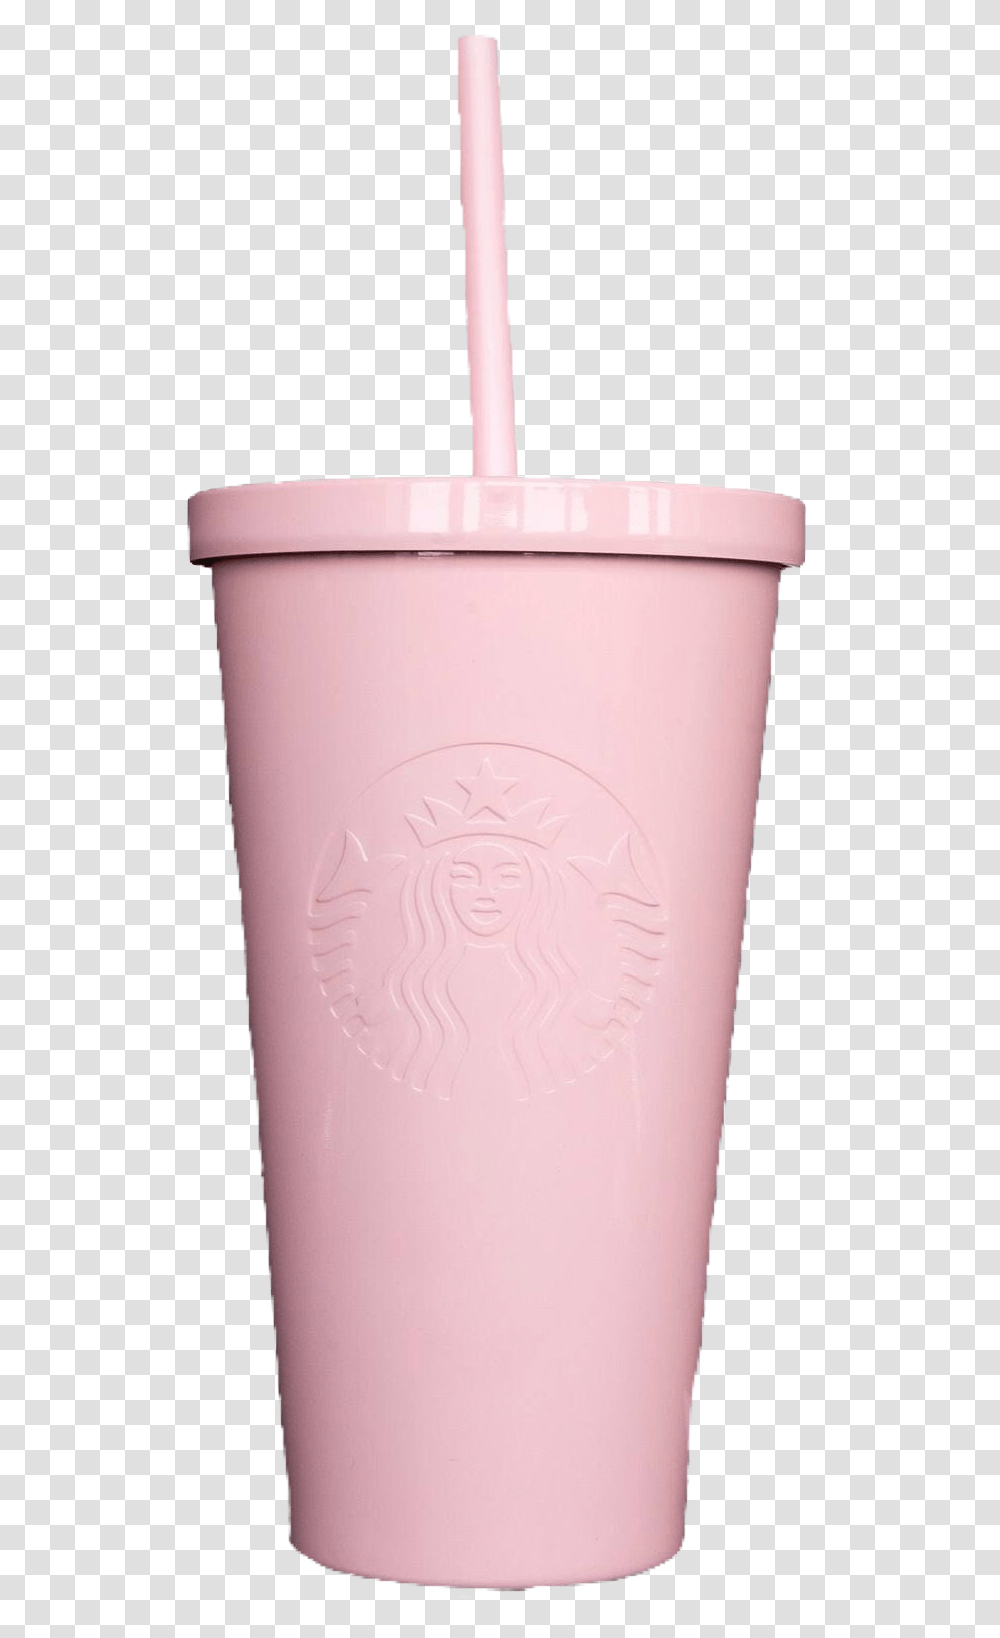 Cute Aesthetic Trendy Clout Lovely Pngs Pngs Starbucks Cold Cup Price, Milk, Beverage, Drink, Coffee Cup Transparent Png